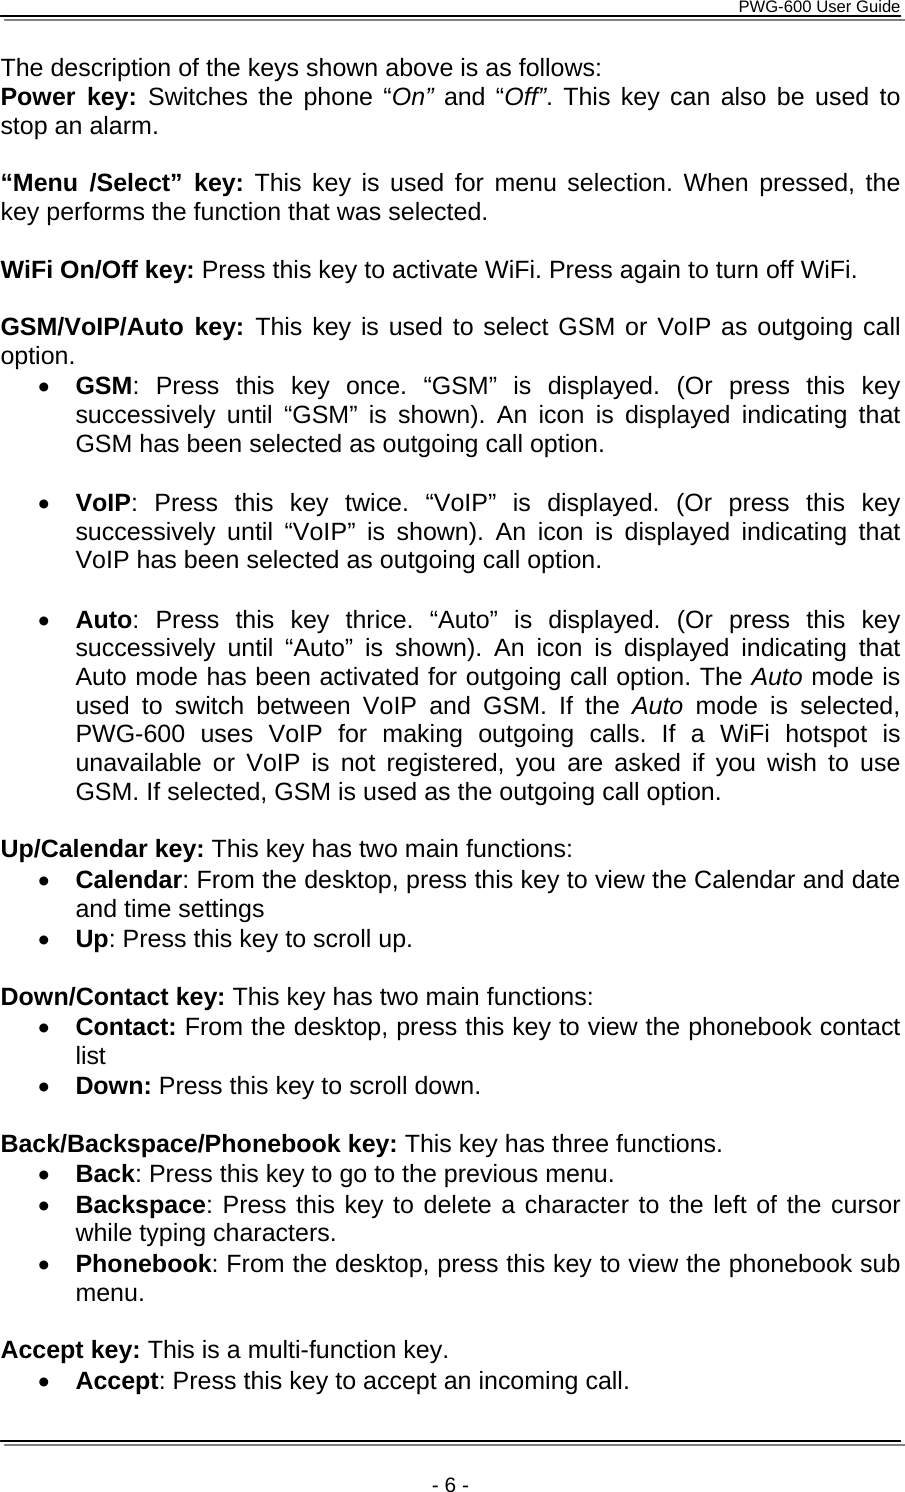      PWG-600 User Guide    - 6 - The description of the keys shown above is as follows: Power key: Switches the phone “On” and “Off”. This key can also be used to stop an alarm.  “Menu /Select” key: This key is used for menu selection. When pressed, the key performs the function that was selected.  WiFi On/Off key: Press this key to activate WiFi. Press again to turn off WiFi.  GSM/VoIP/Auto key: This key is used to select GSM or VoIP as outgoing call option. • GSM: Press this key once. “GSM” is displayed. (Or press this key successively until “GSM” is shown). An icon is displayed indicating that GSM has been selected as outgoing call option.  • VoIP: Press this key twice. “VoIP” is displayed. (Or press this key successively until “VoIP” is shown). An icon is displayed indicating that VoIP has been selected as outgoing call option.  • Auto: Press this key thrice. “Auto” is displayed. (Or press this key successively until “Auto” is shown). An icon is displayed indicating that Auto mode has been activated for outgoing call option. The Auto mode is used to switch between VoIP and GSM. If the Auto mode is selected, PWG-600 uses VoIP for making outgoing calls. If a WiFi hotspot is unavailable or VoIP is not registered, you are asked if you wish to use GSM. If selected, GSM is used as the outgoing call option.  Up/Calendar key: This key has two main functions: • Calendar: From the desktop, press this key to view the Calendar and date and time settings • Up: Press this key to scroll up.  Down/Contact key: This key has two main functions: • Contact: From the desktop, press this key to view the phonebook contact list • Down: Press this key to scroll down.  Back/Backspace/Phonebook key: This key has three functions. • Back: Press this key to go to the previous menu. • Backspace: Press this key to delete a character to the left of the cursor while typing characters. • Phonebook: From the desktop, press this key to view the phonebook sub menu.  Accept key: This is a multi-function key. • Accept: Press this key to accept an incoming call. 